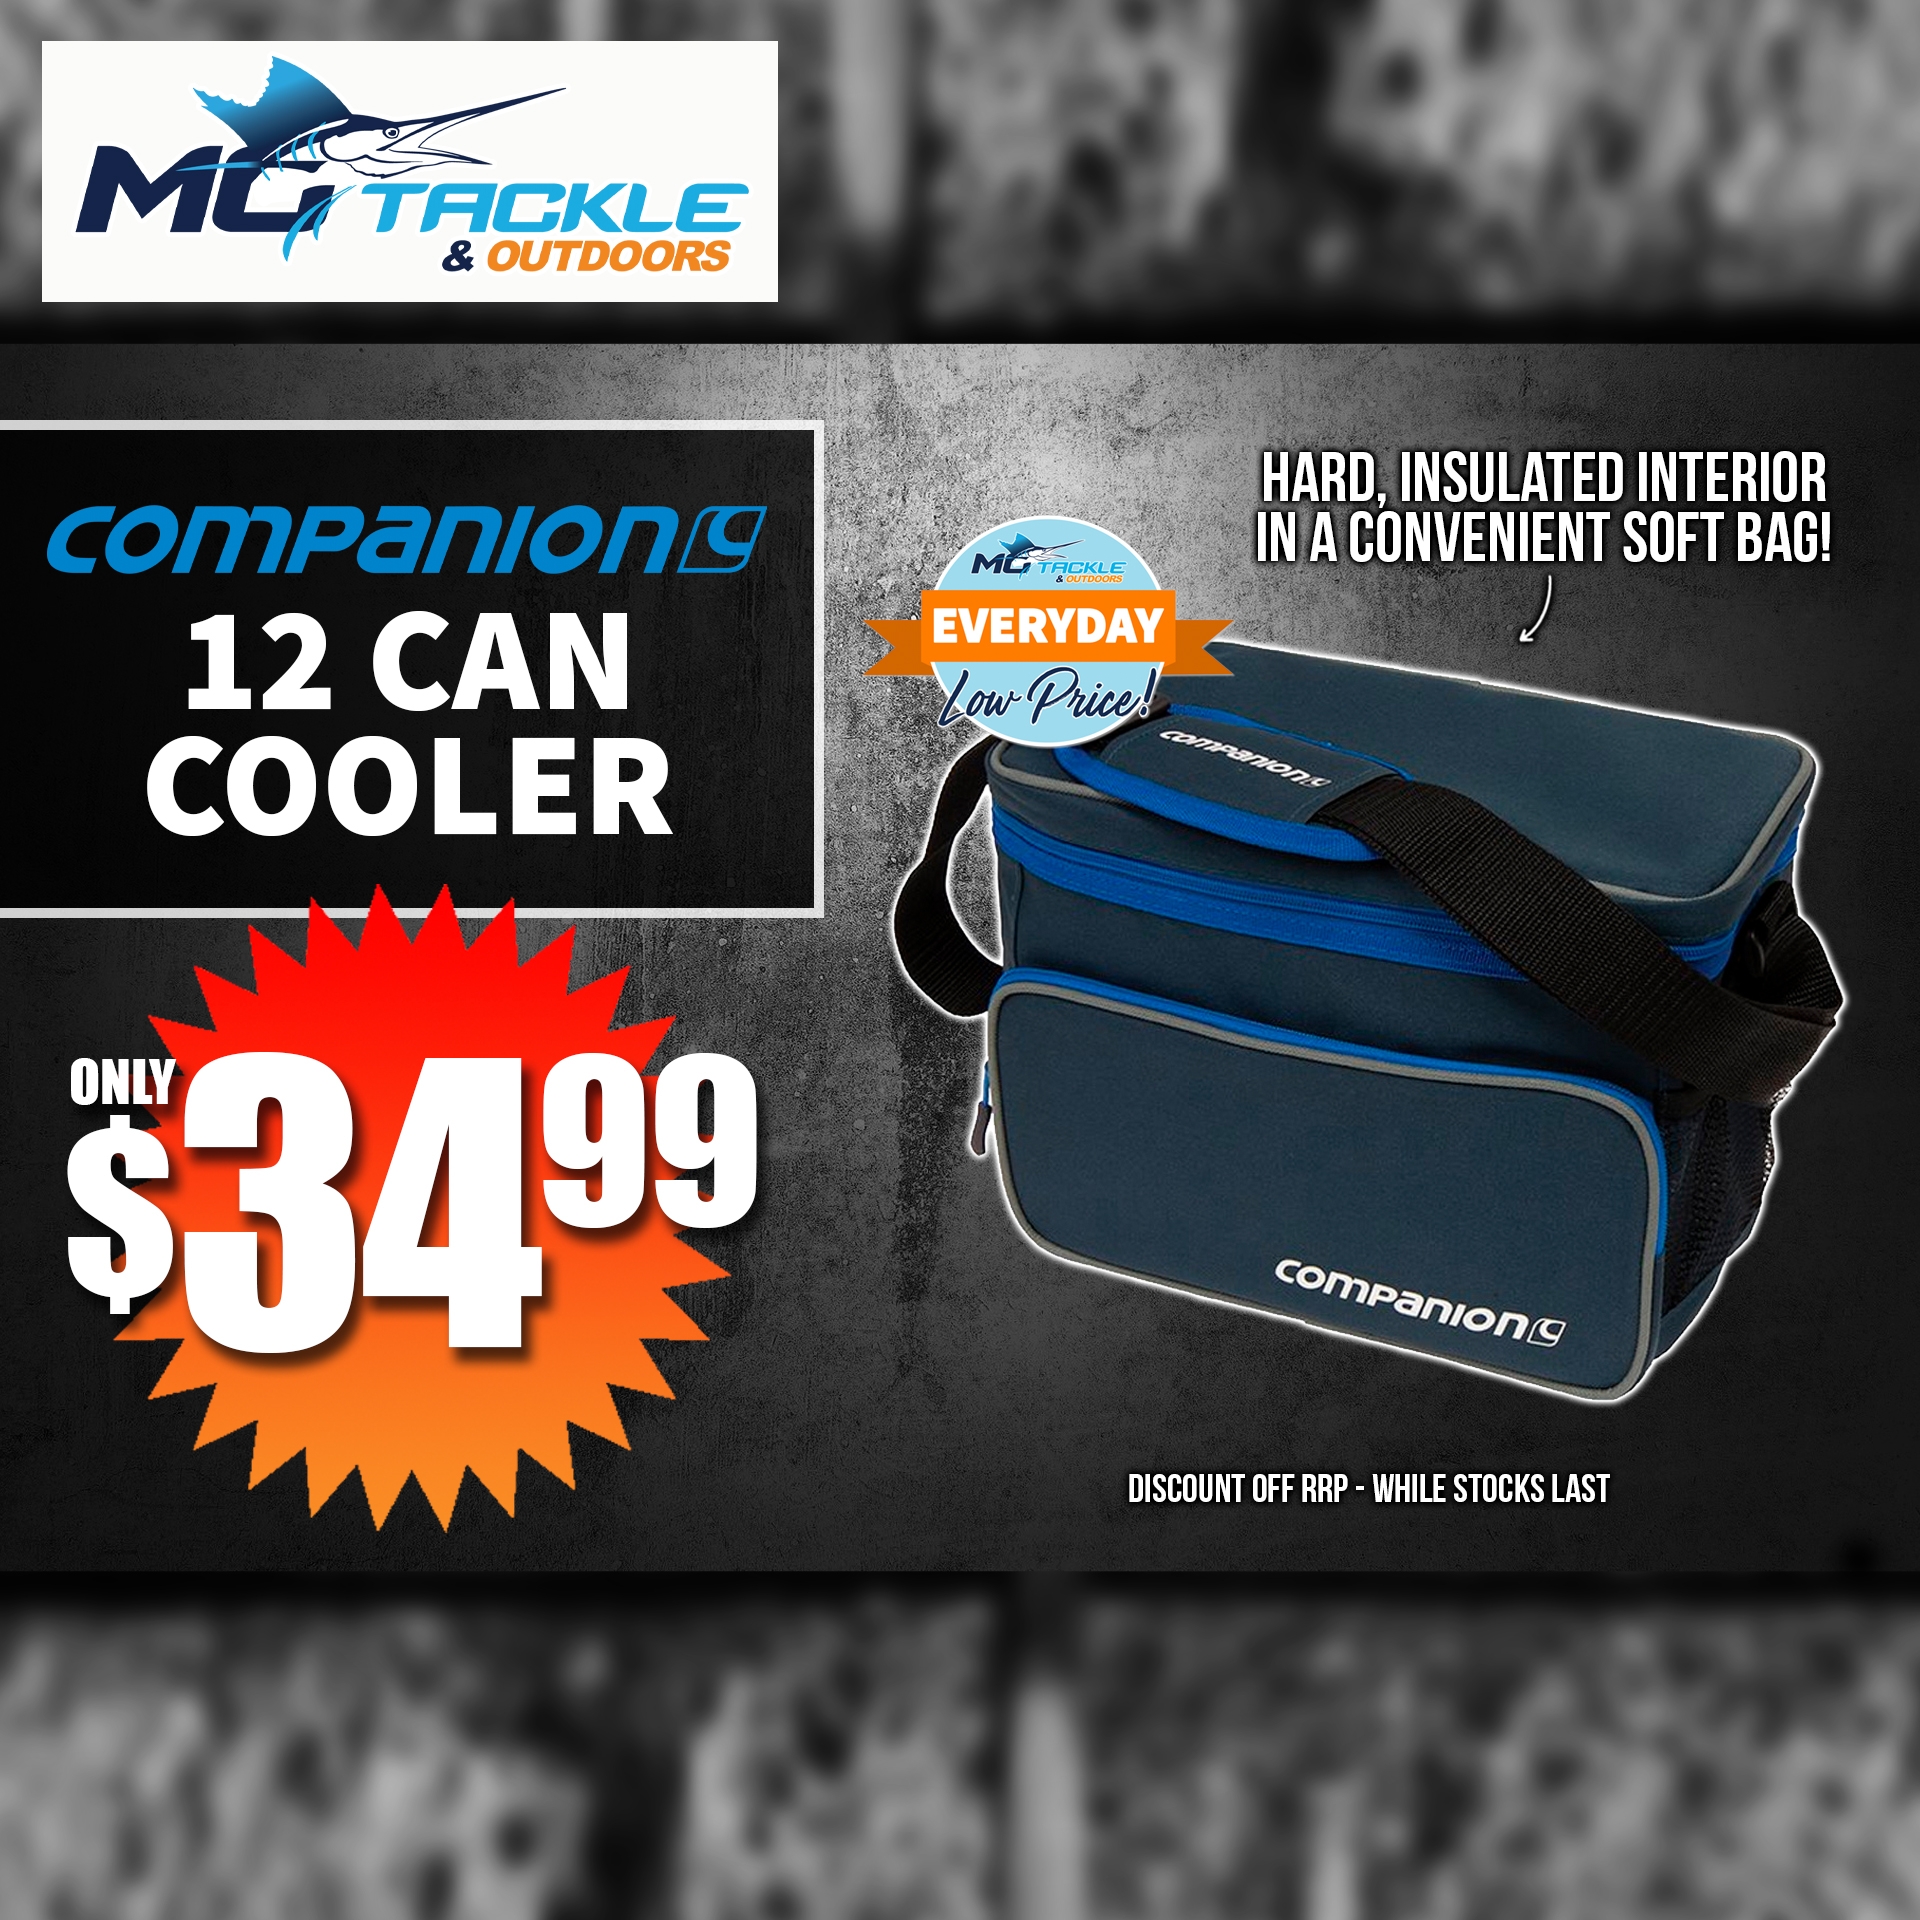 COMPANION 12 CAN CROSSOVER COOLER only $34.99